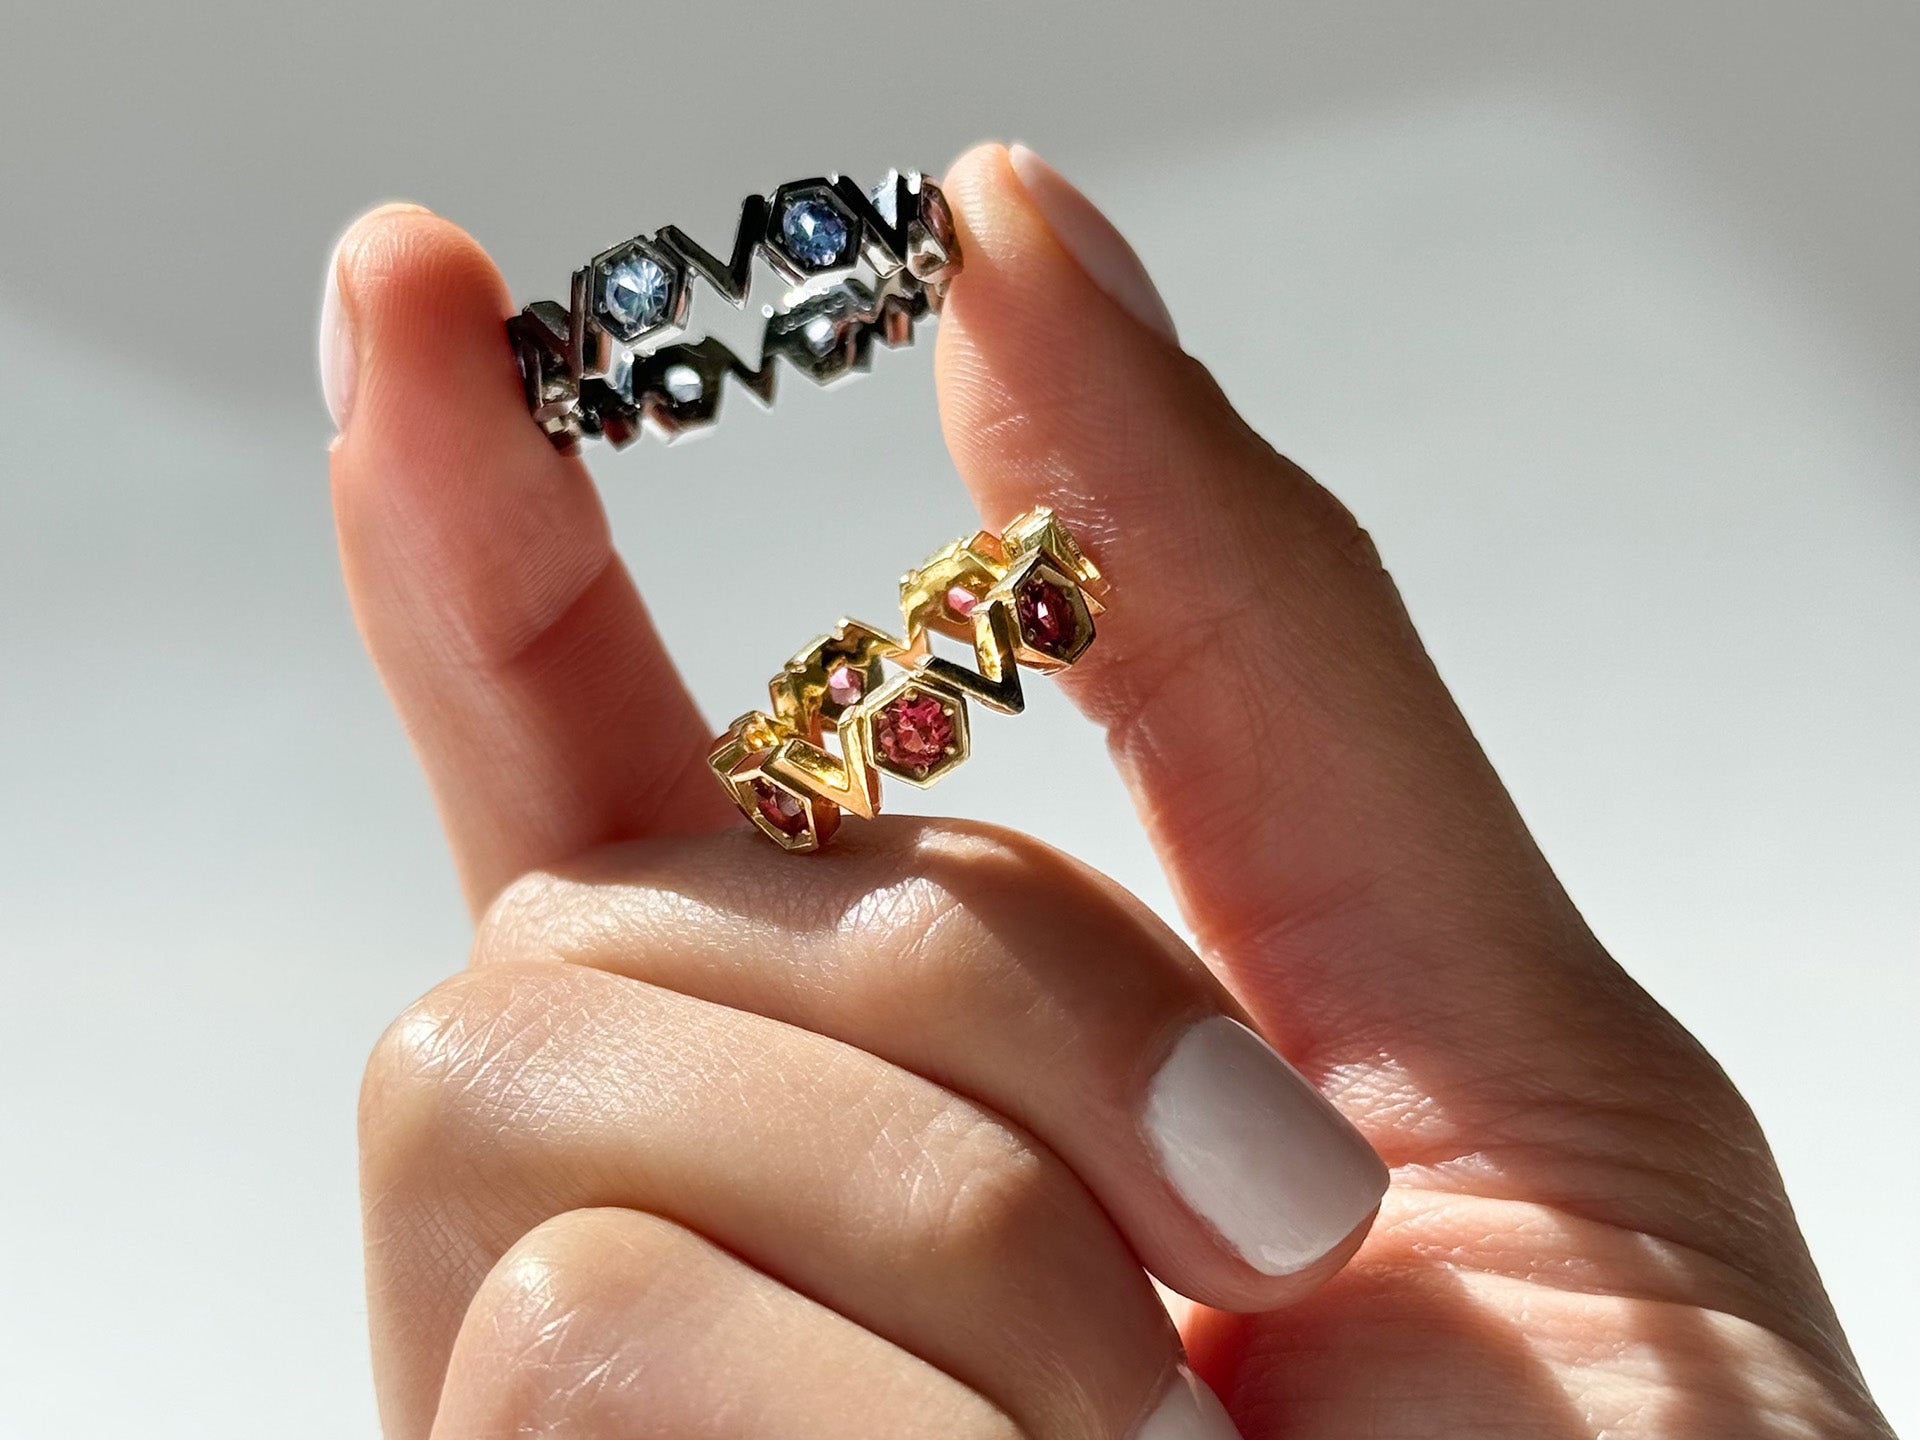 Gold Plated Silver Band with repeating Pink Tourmaline hexagons and V shapes, Medium - Model shot